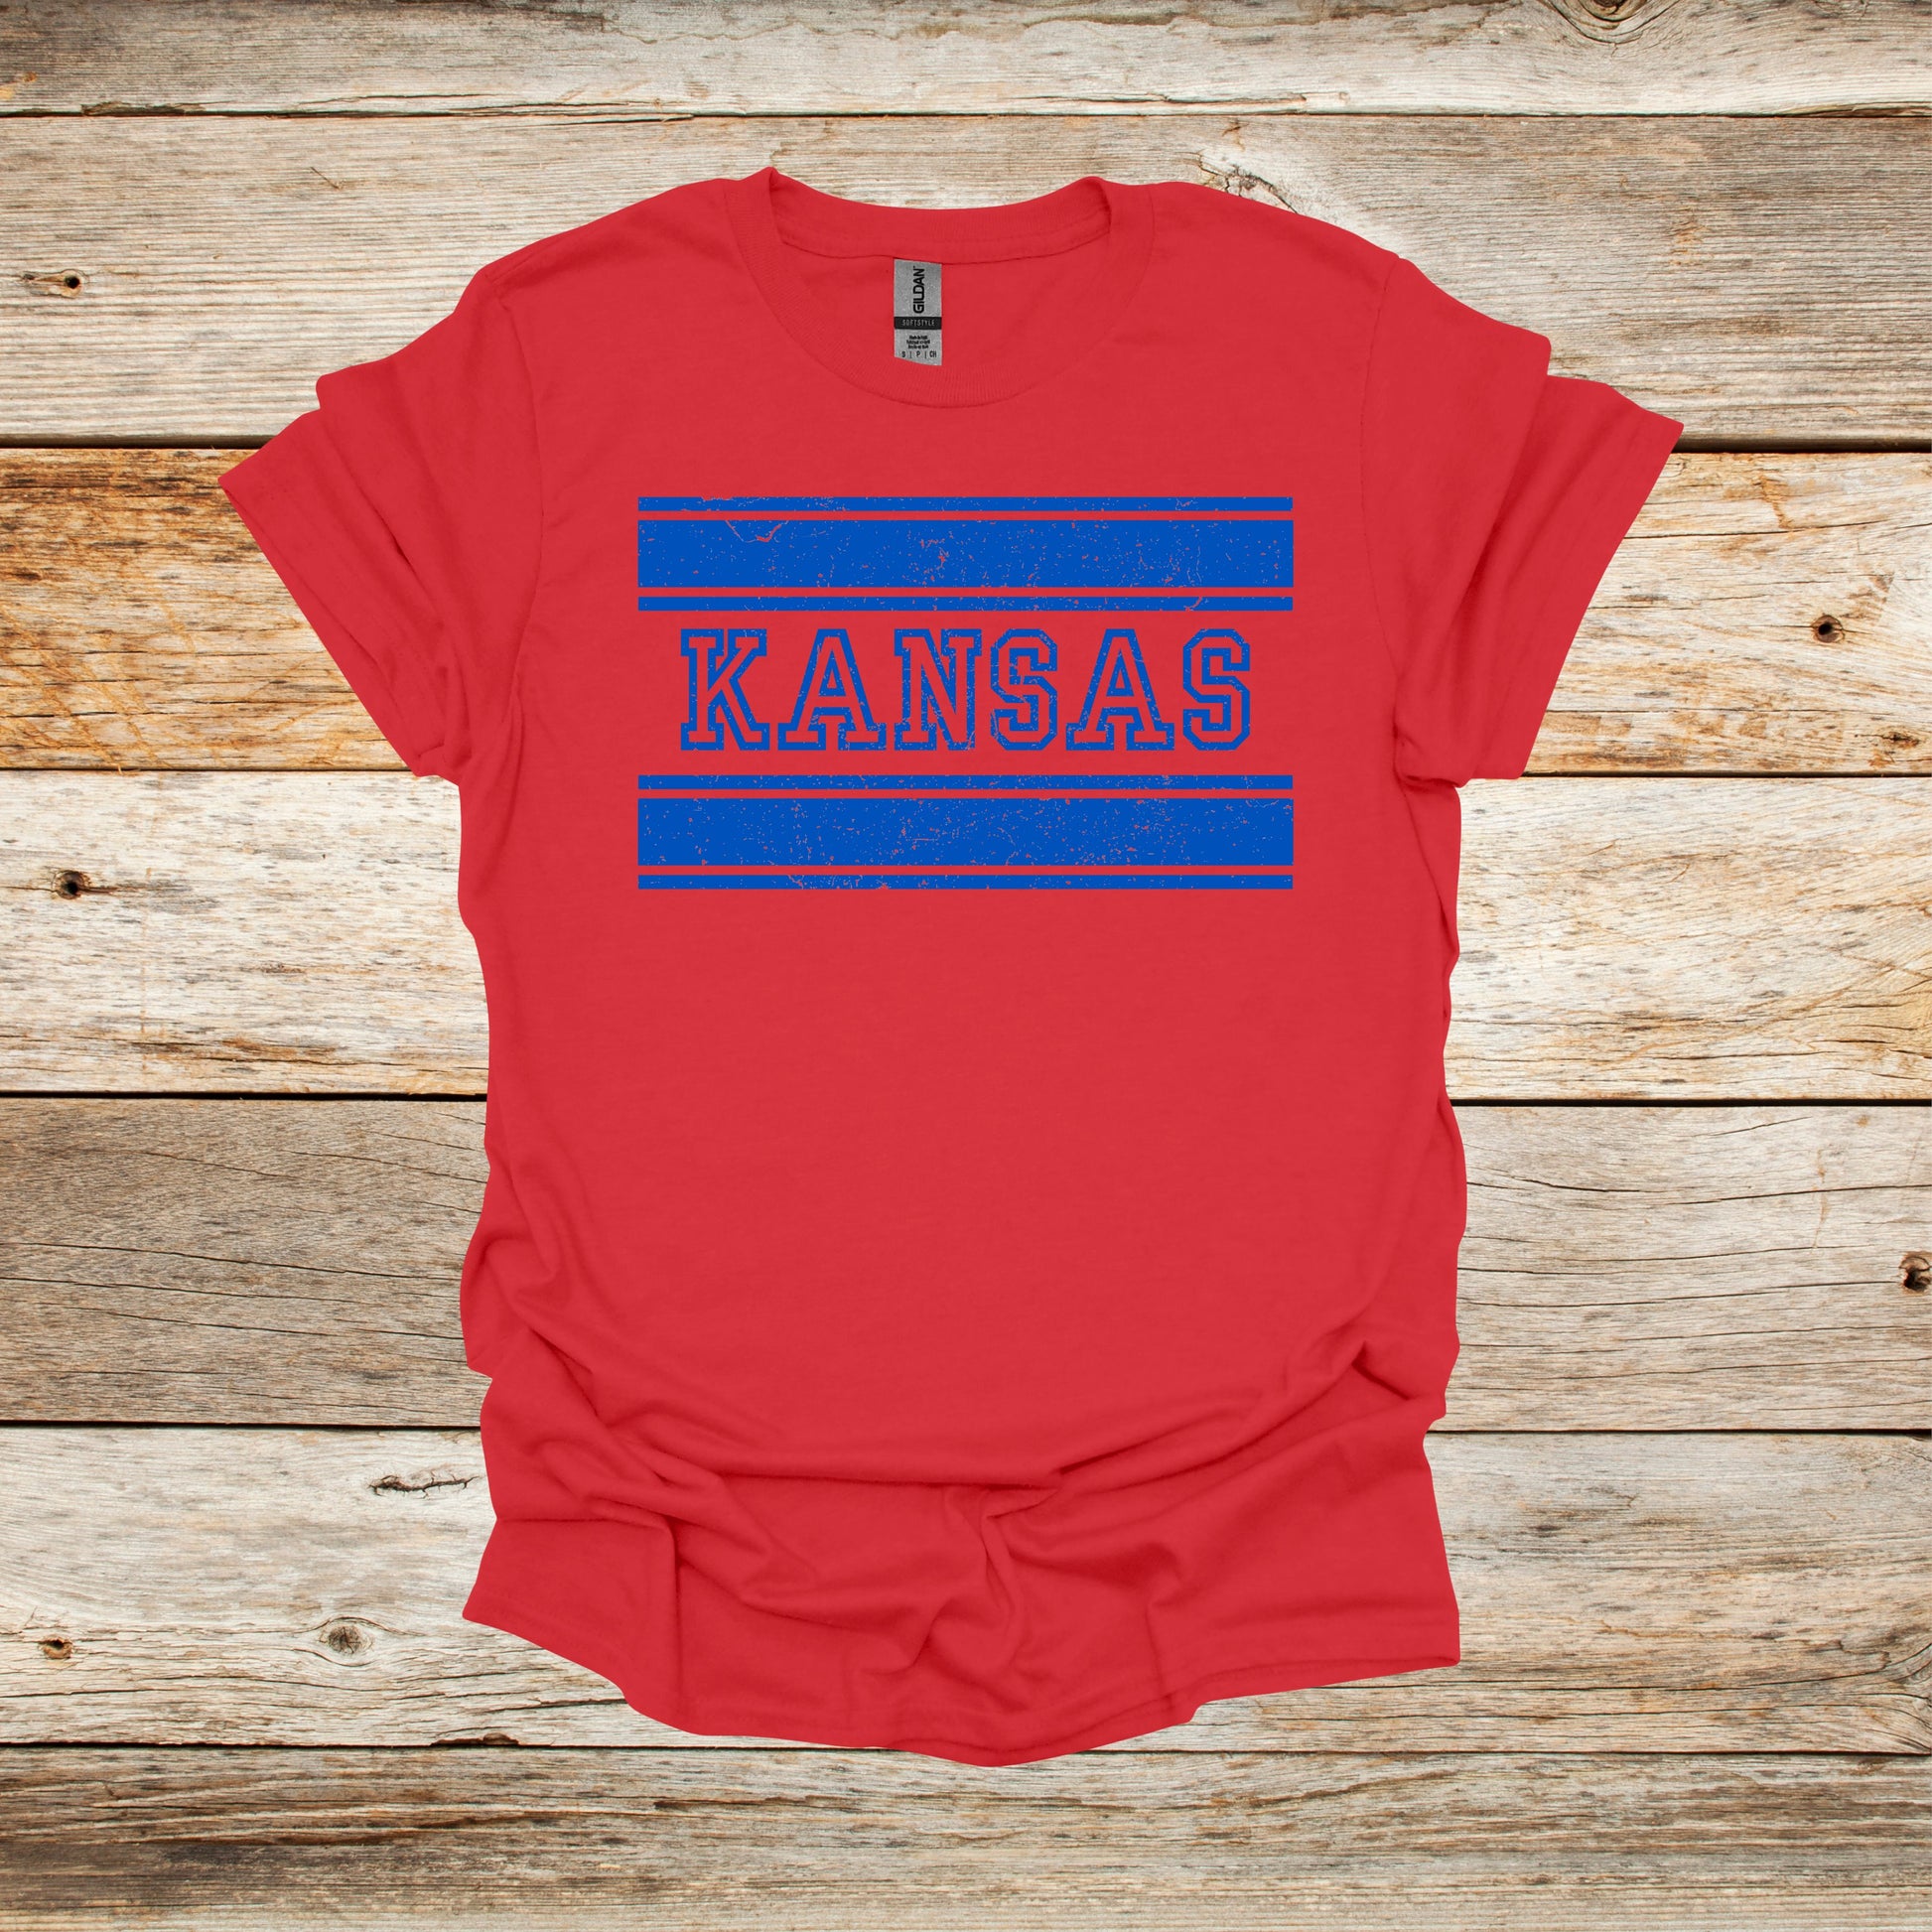 College T Shirt - Kansas Jayhawks - Adult and Children's Tee Shirts T-Shirts Graphic Avenue Red Adult Small 